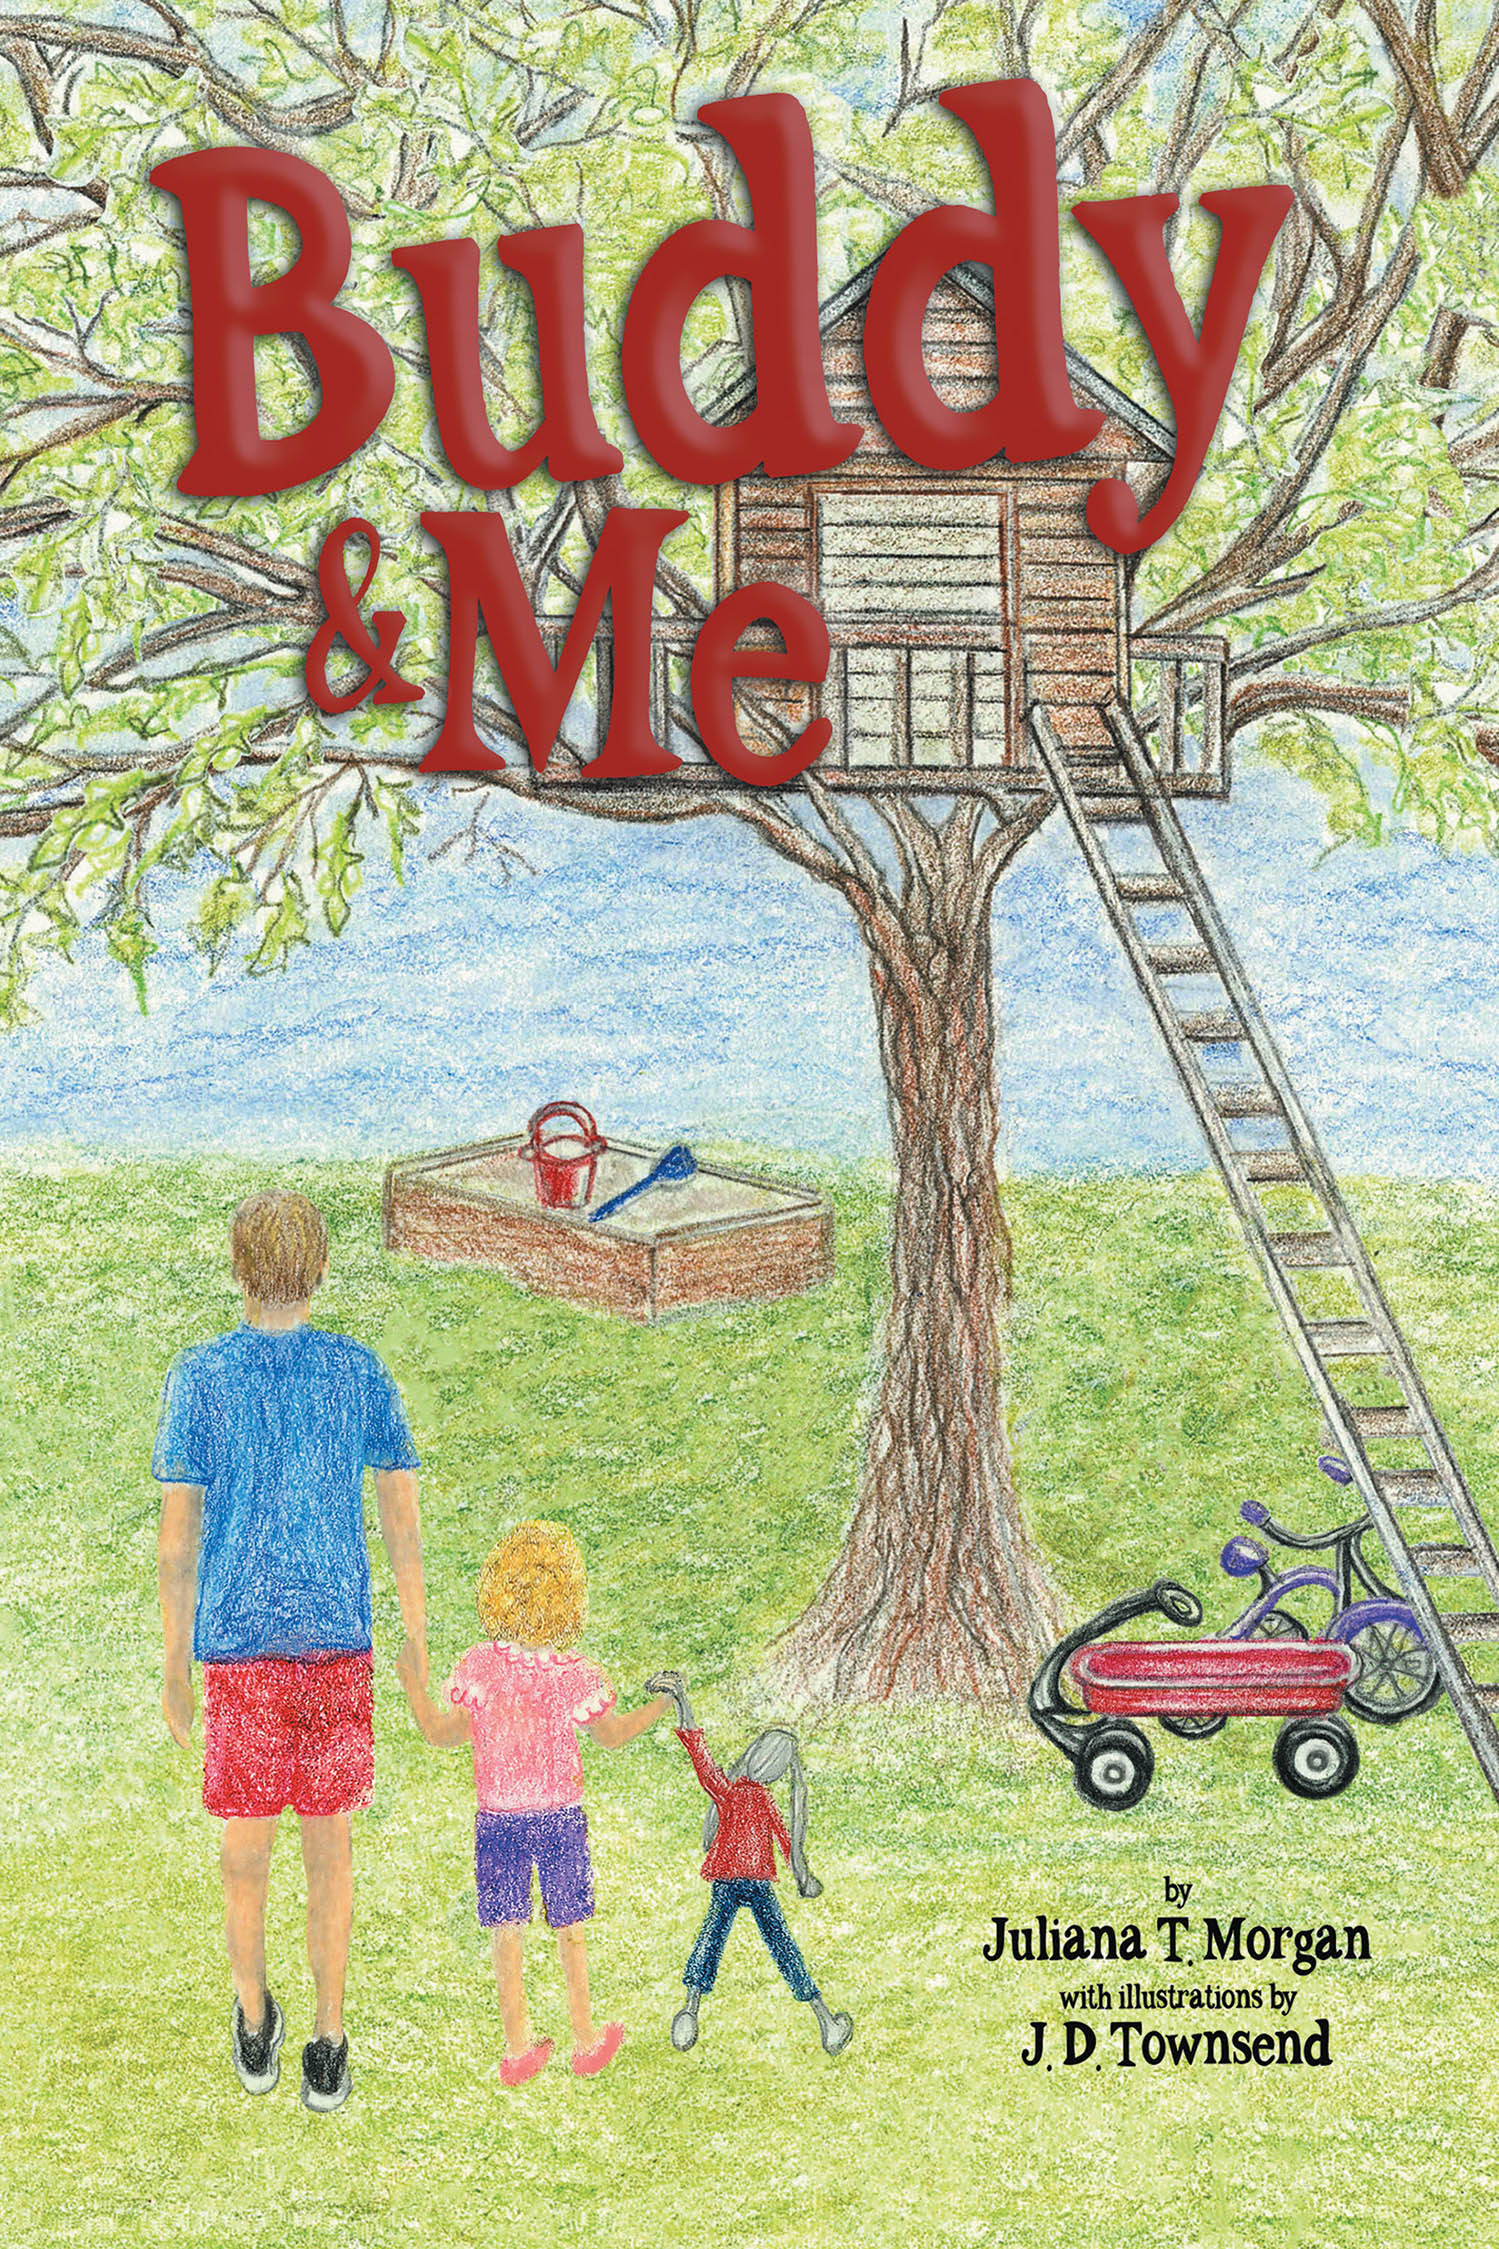 Author Juliana T. Morgan’s New Book, "Buddy & Me," is a Charming Story of How a Toy Rabbit Has the Gift of Bringing Comfort and Joy to the Young and Young-at-Heart